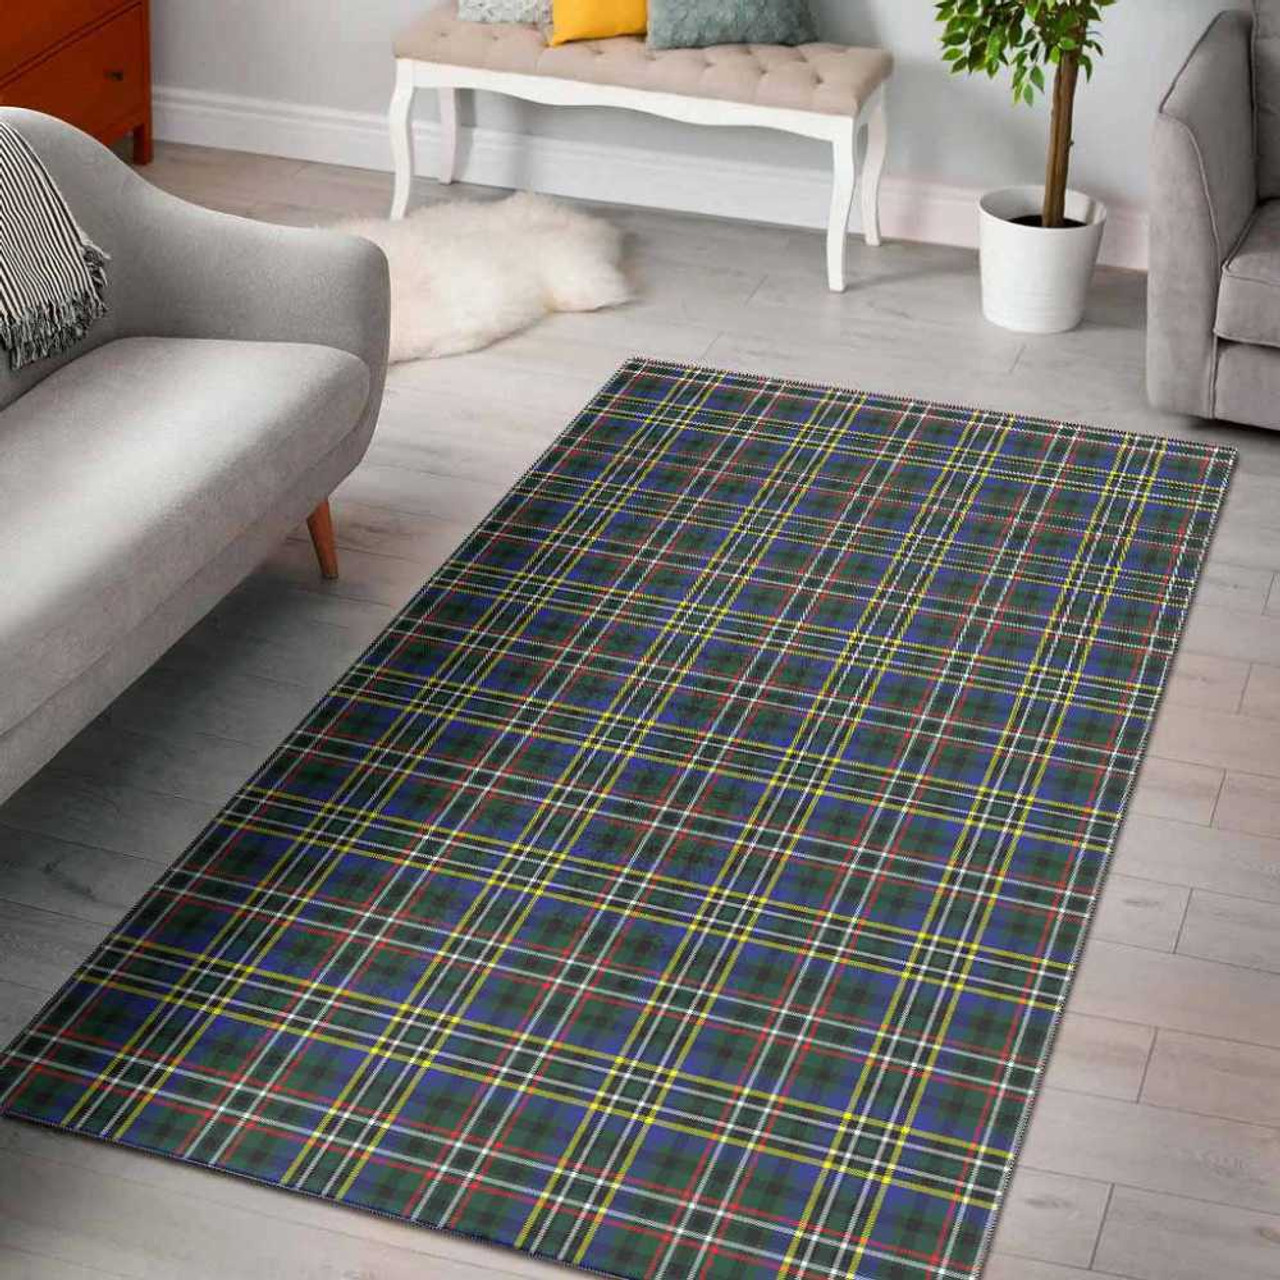 Chic Puzzle Style Rug - Antislip Design - For Stylish Flooring from 1ST  Missing Piece